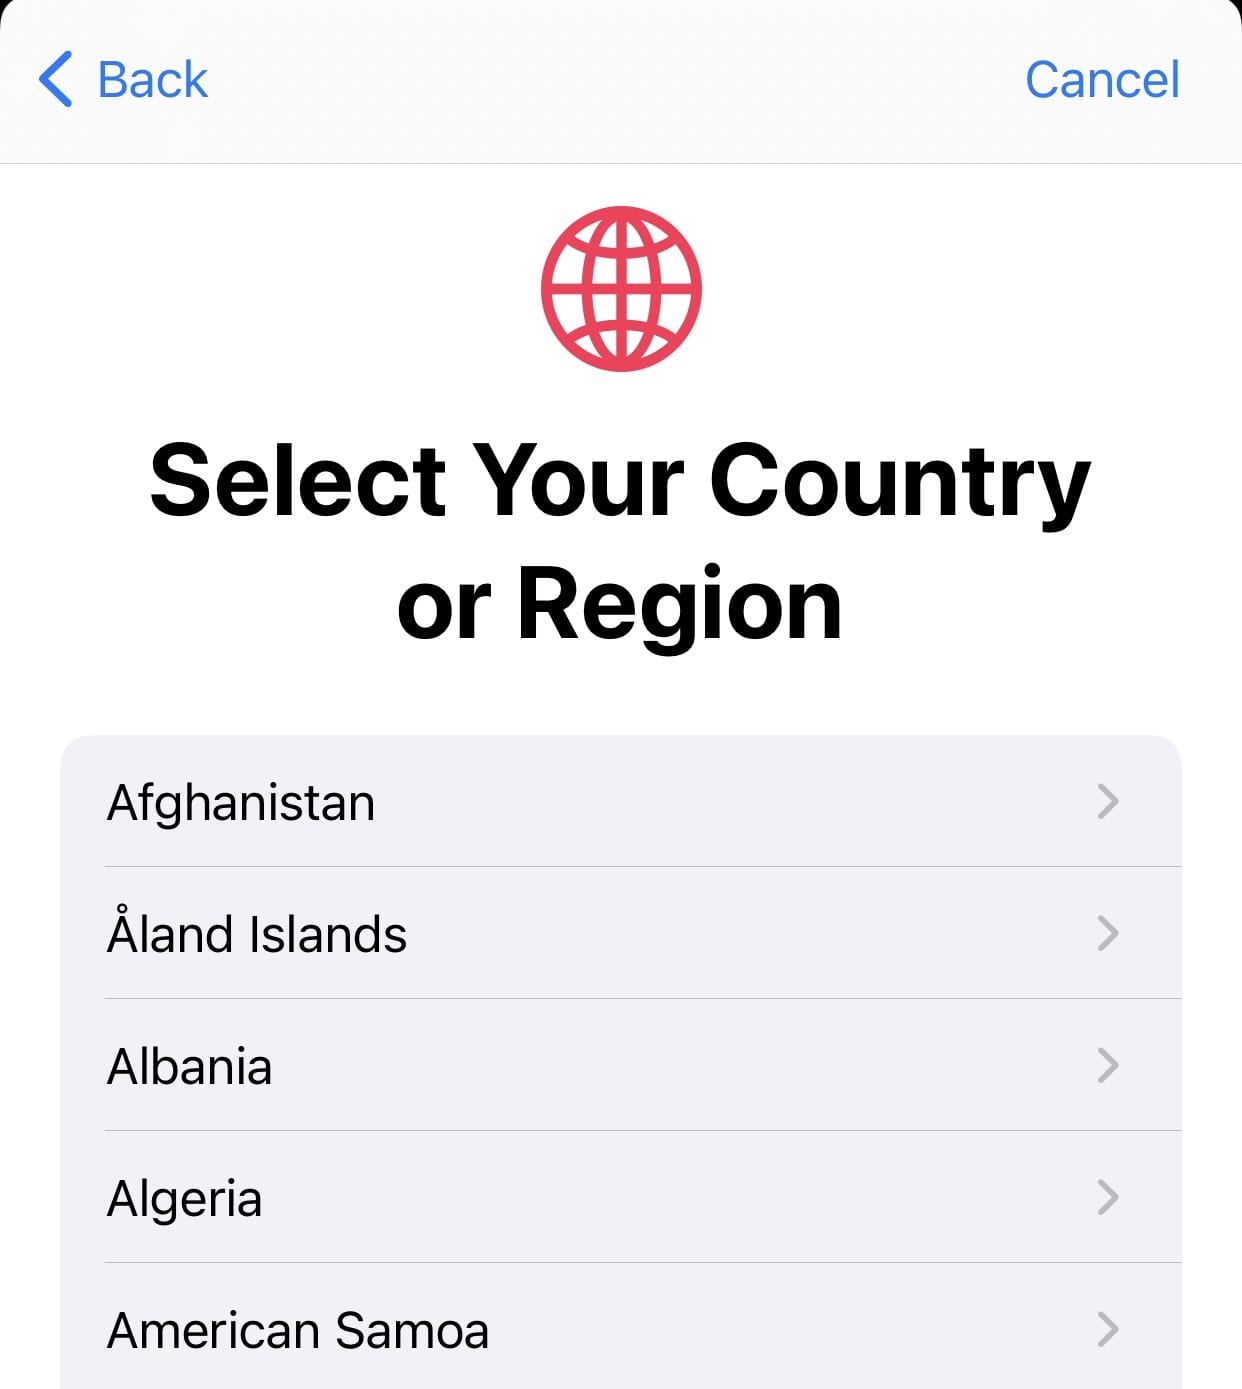 Select your country for contact tracing